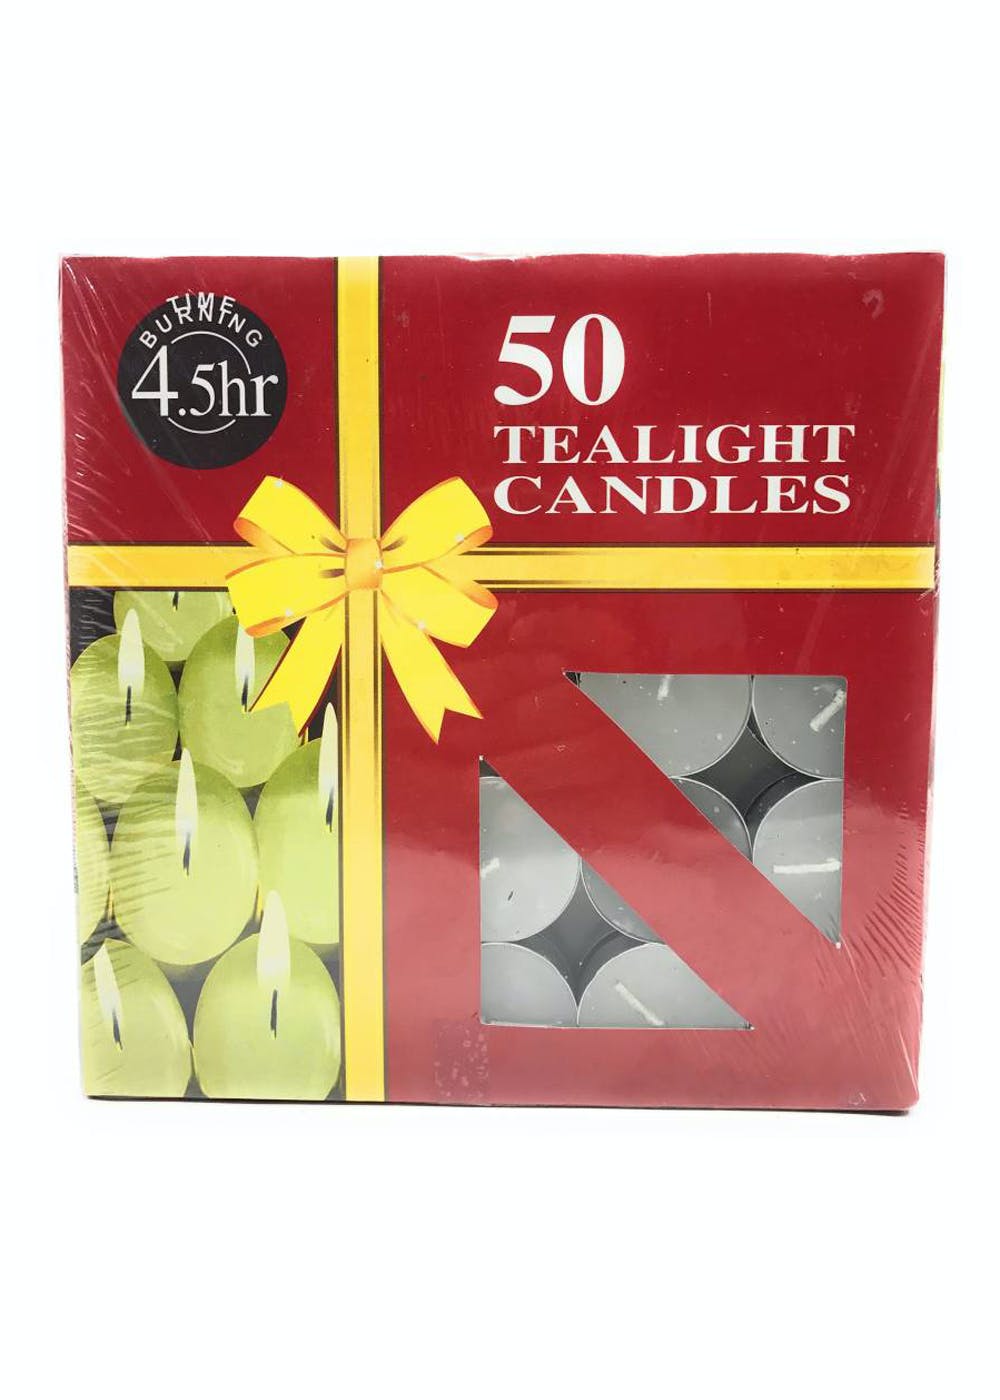 Tealight Candles - Pack of 50